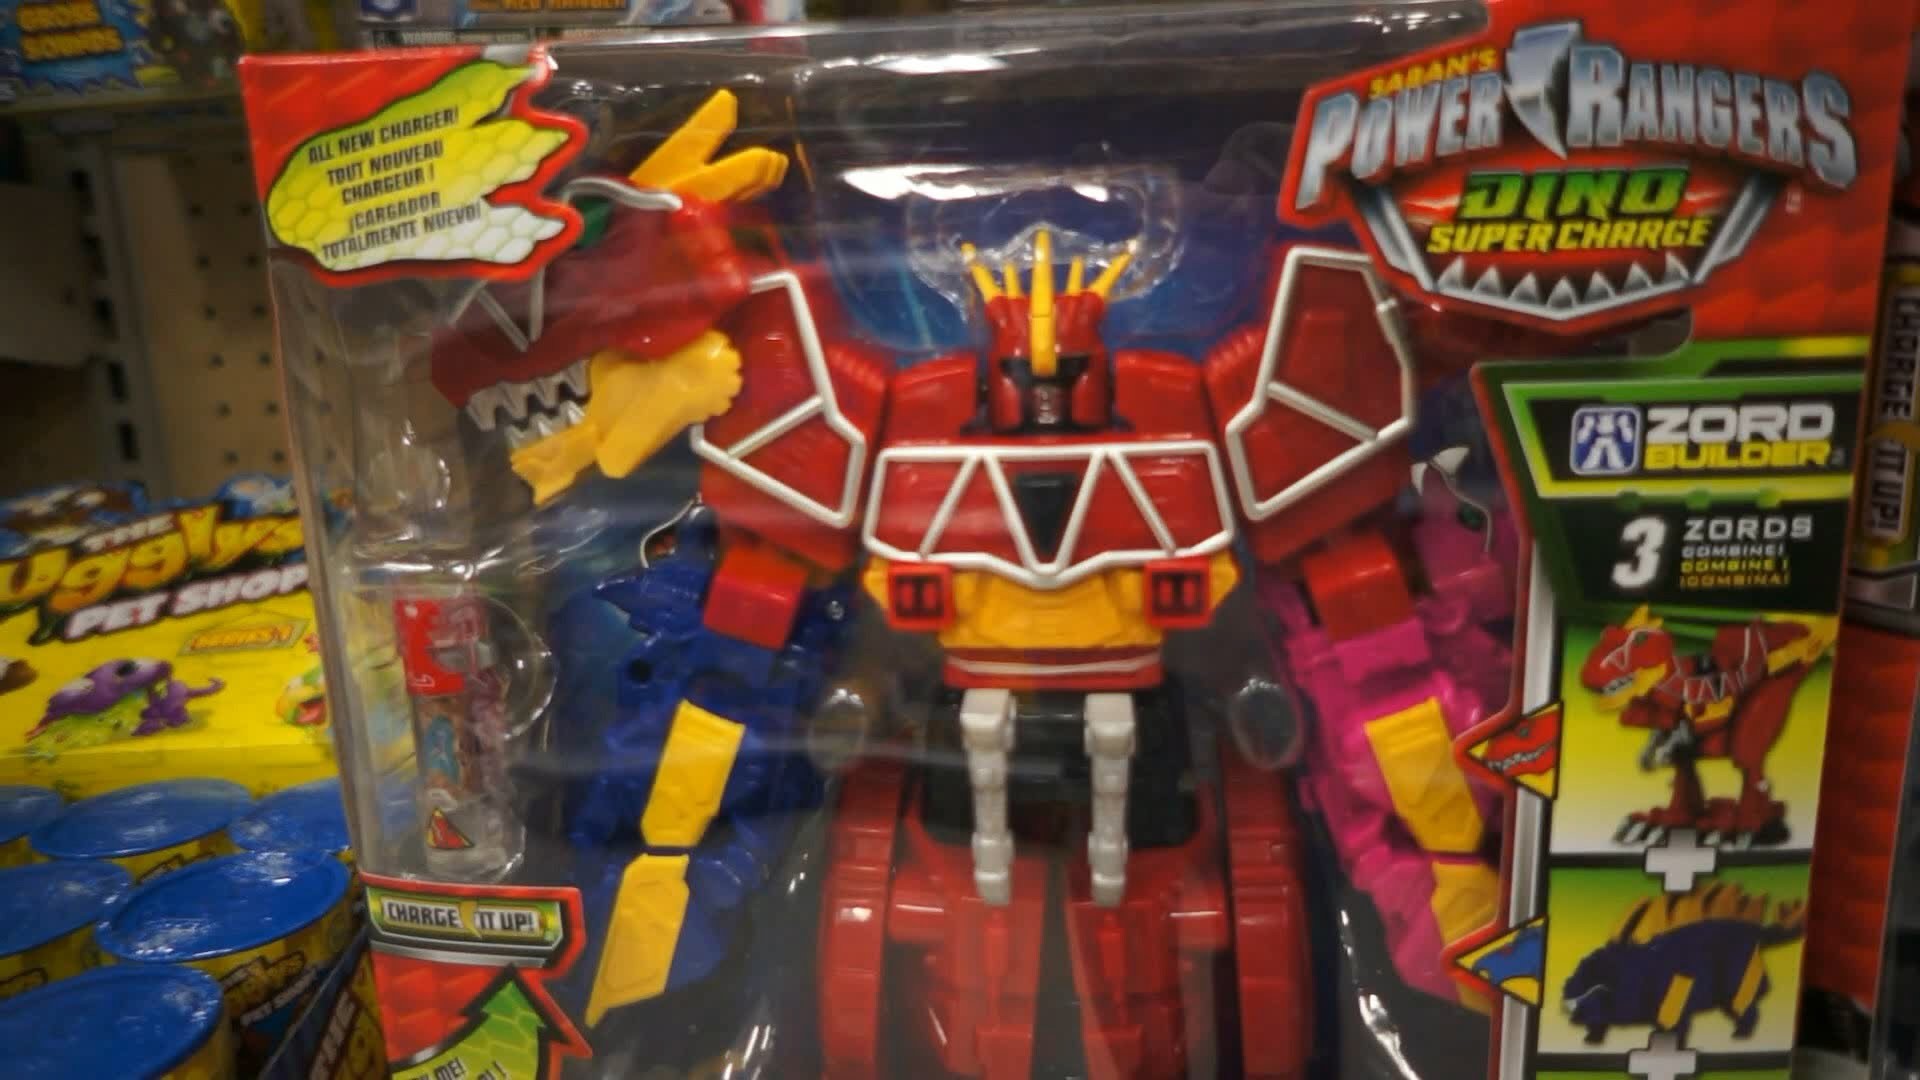 1920x1080 Power Rangers Dino Super Charge Toys at Target Store #1 (December 2015) -  YouTube